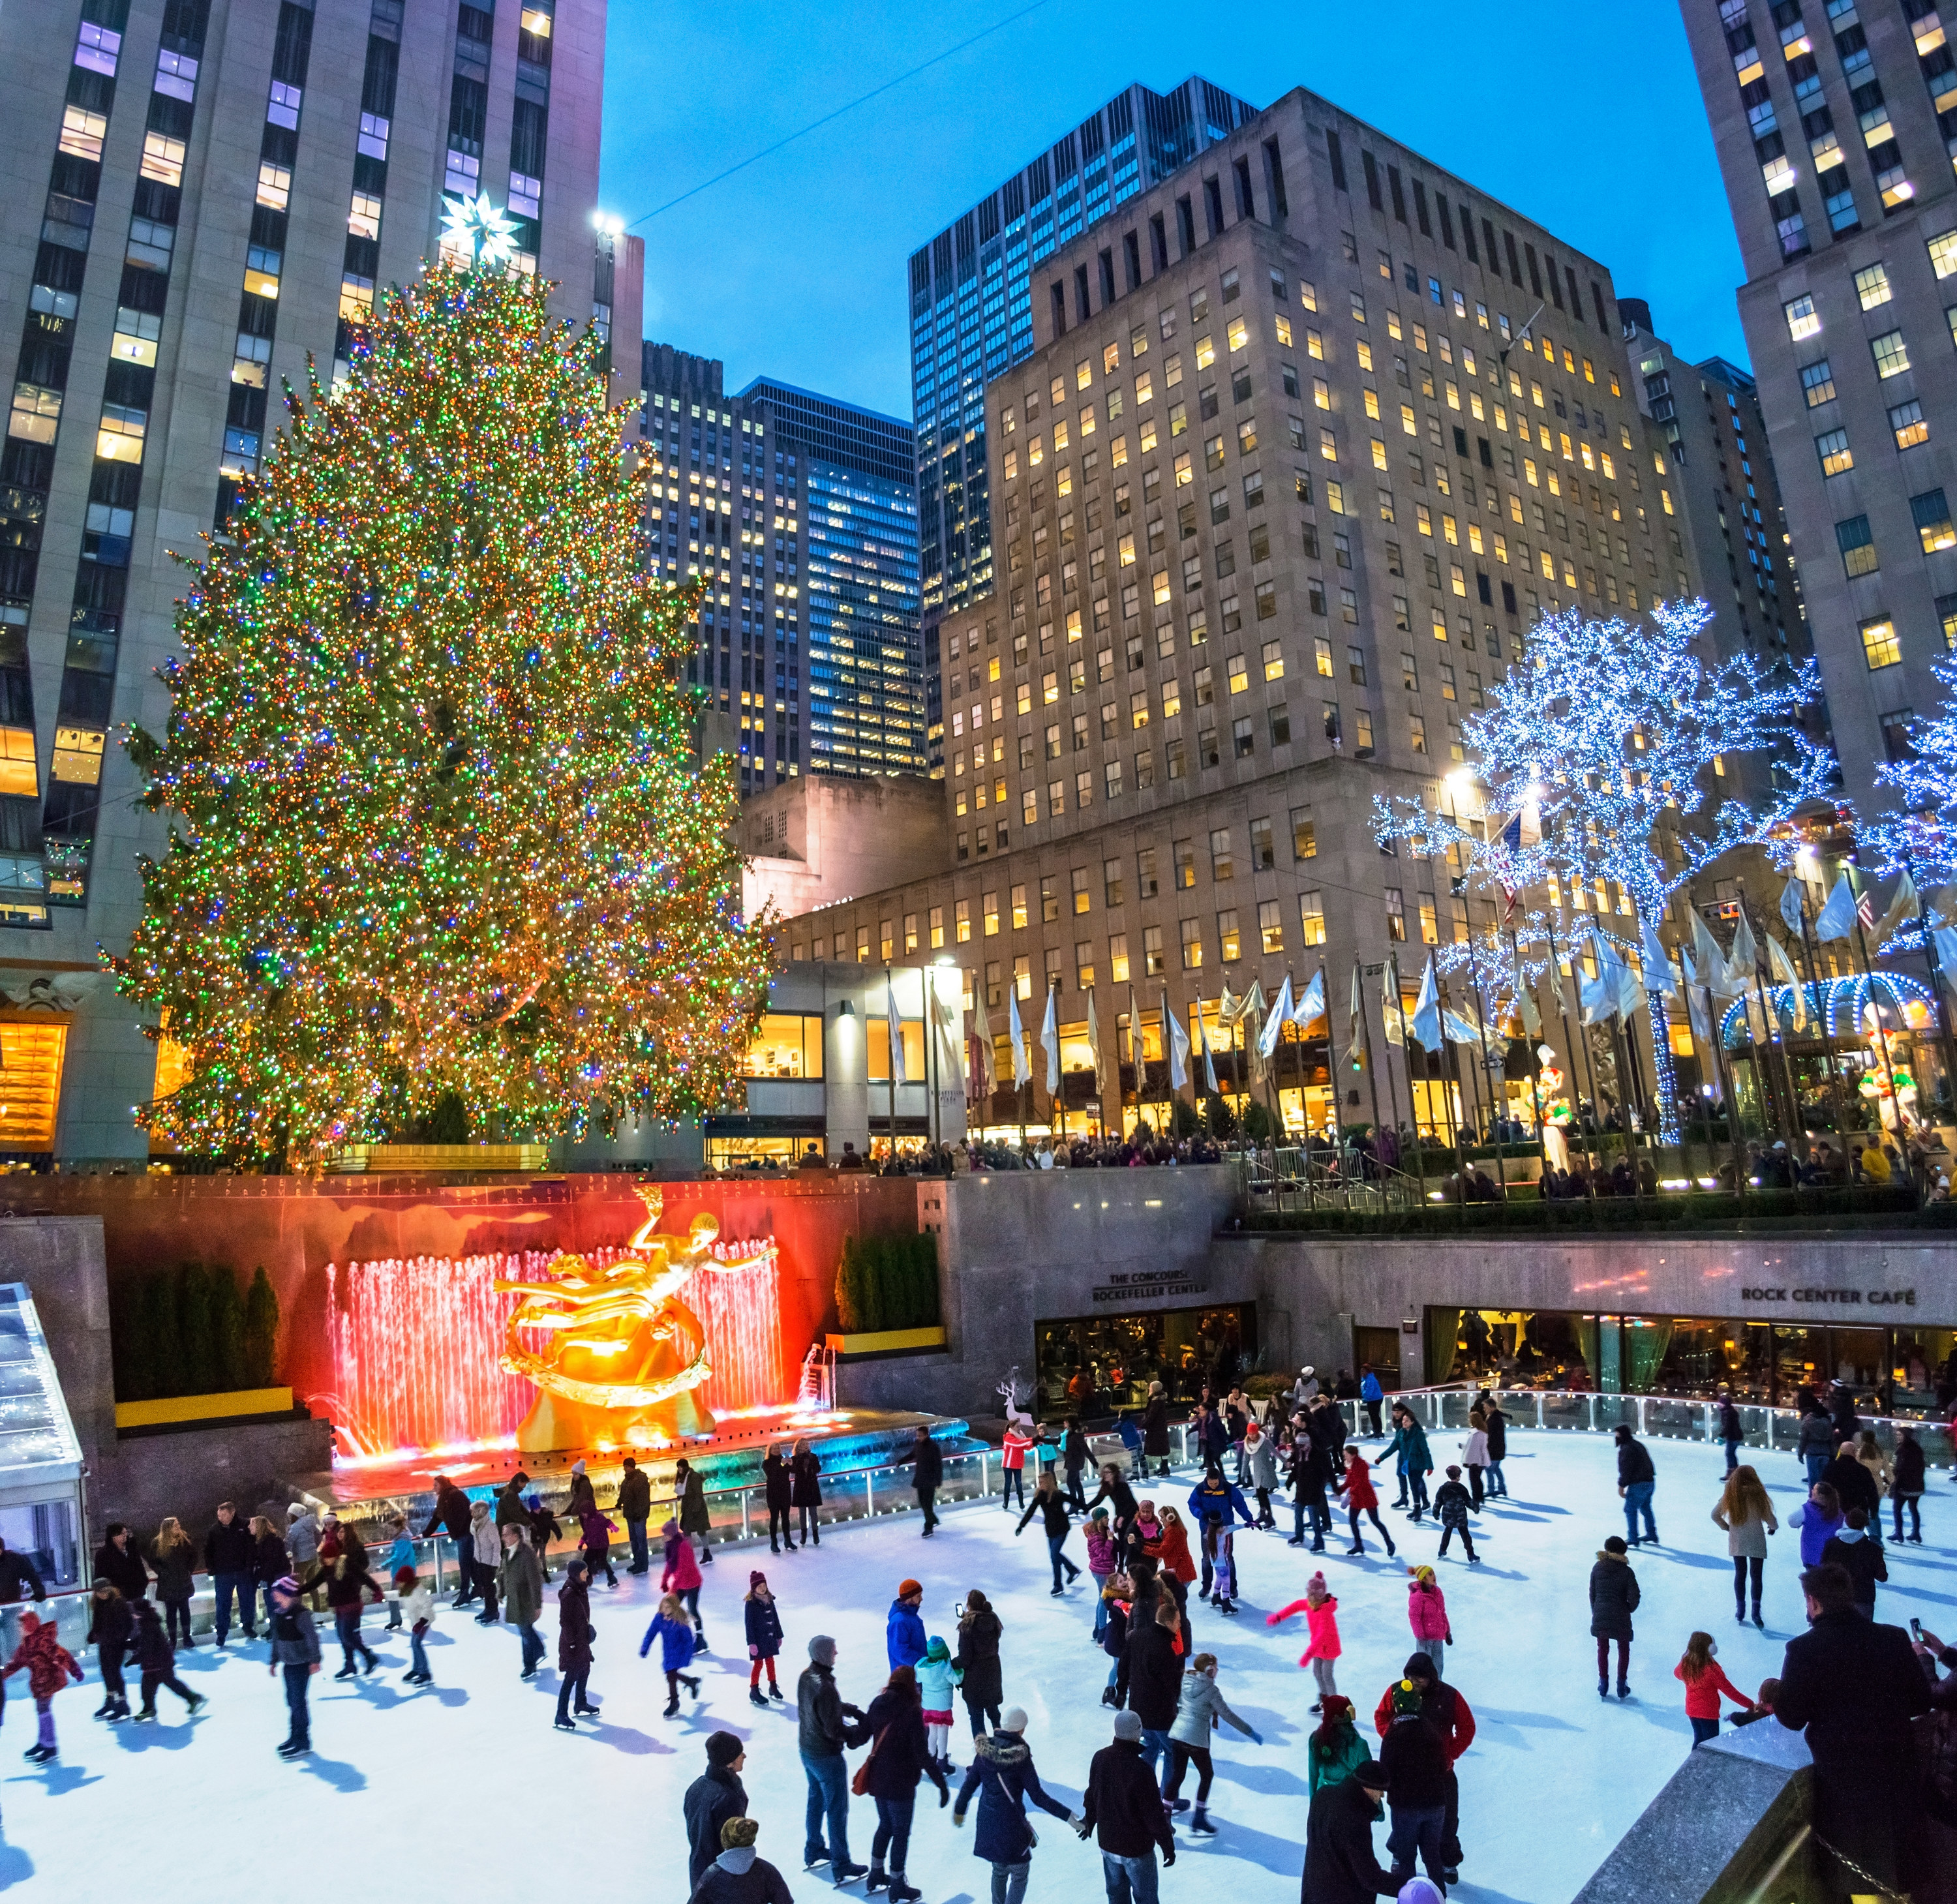 People ice skating under the Christmas tree at Rockefeller Center